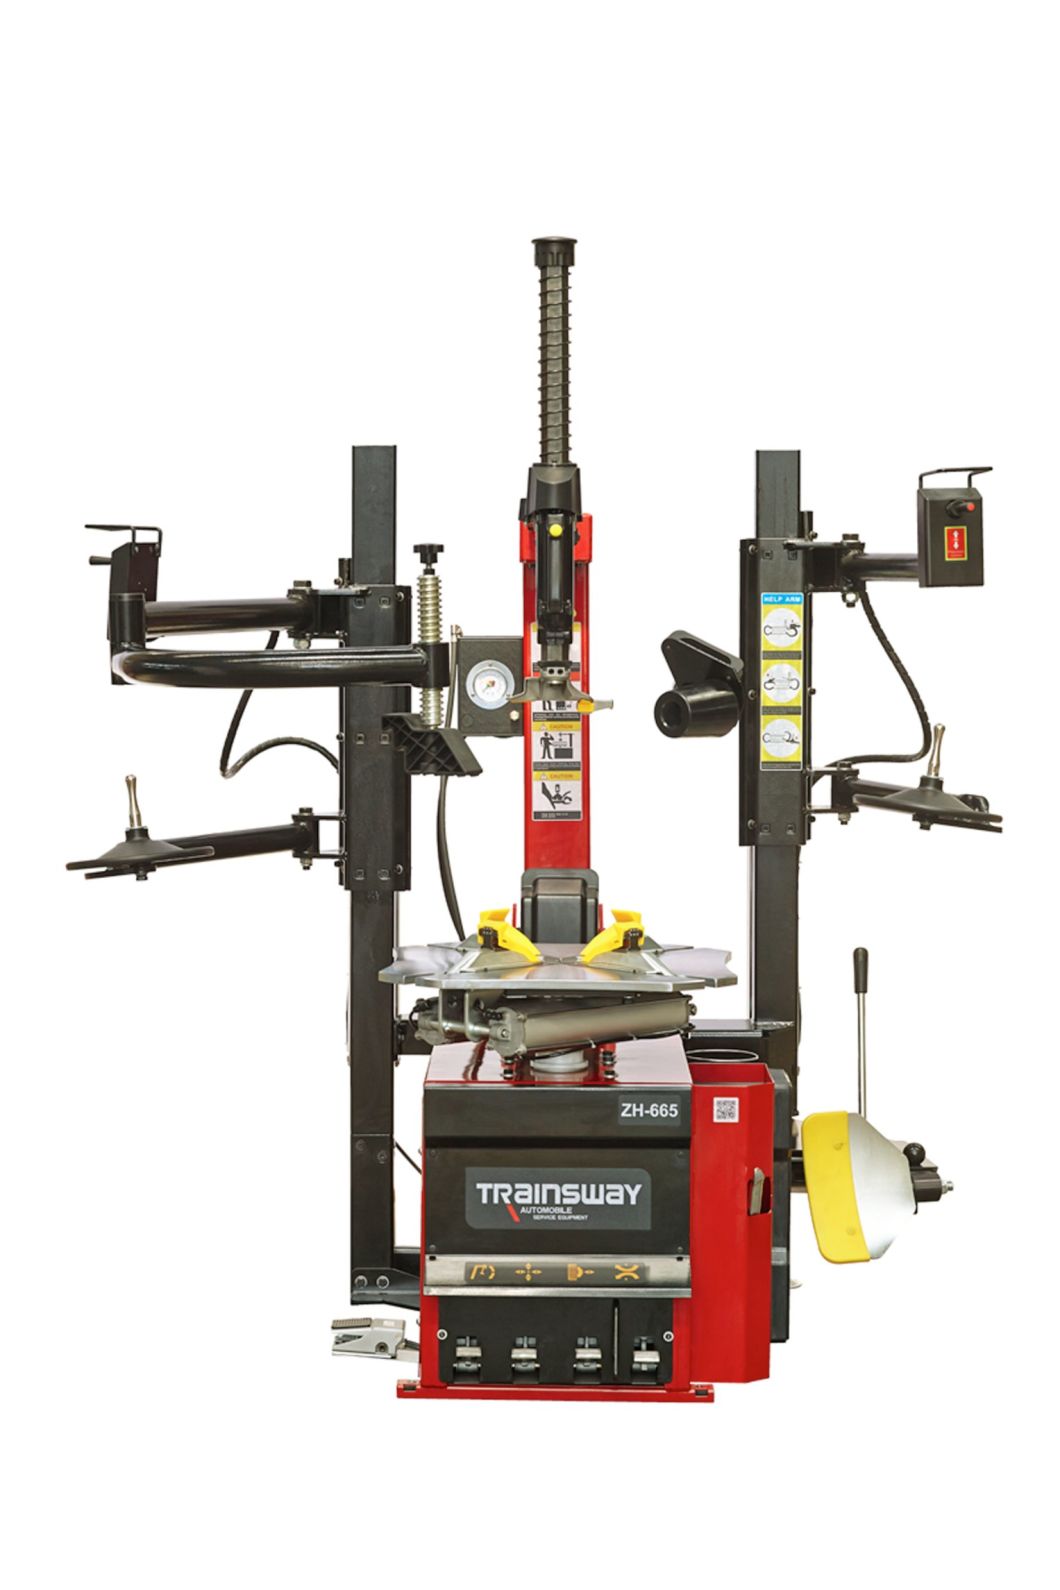 Garage Equipment Heavy-Duty Tilt-Back Tire Changer with Dual Assist Arm Trainsway Zh665SA